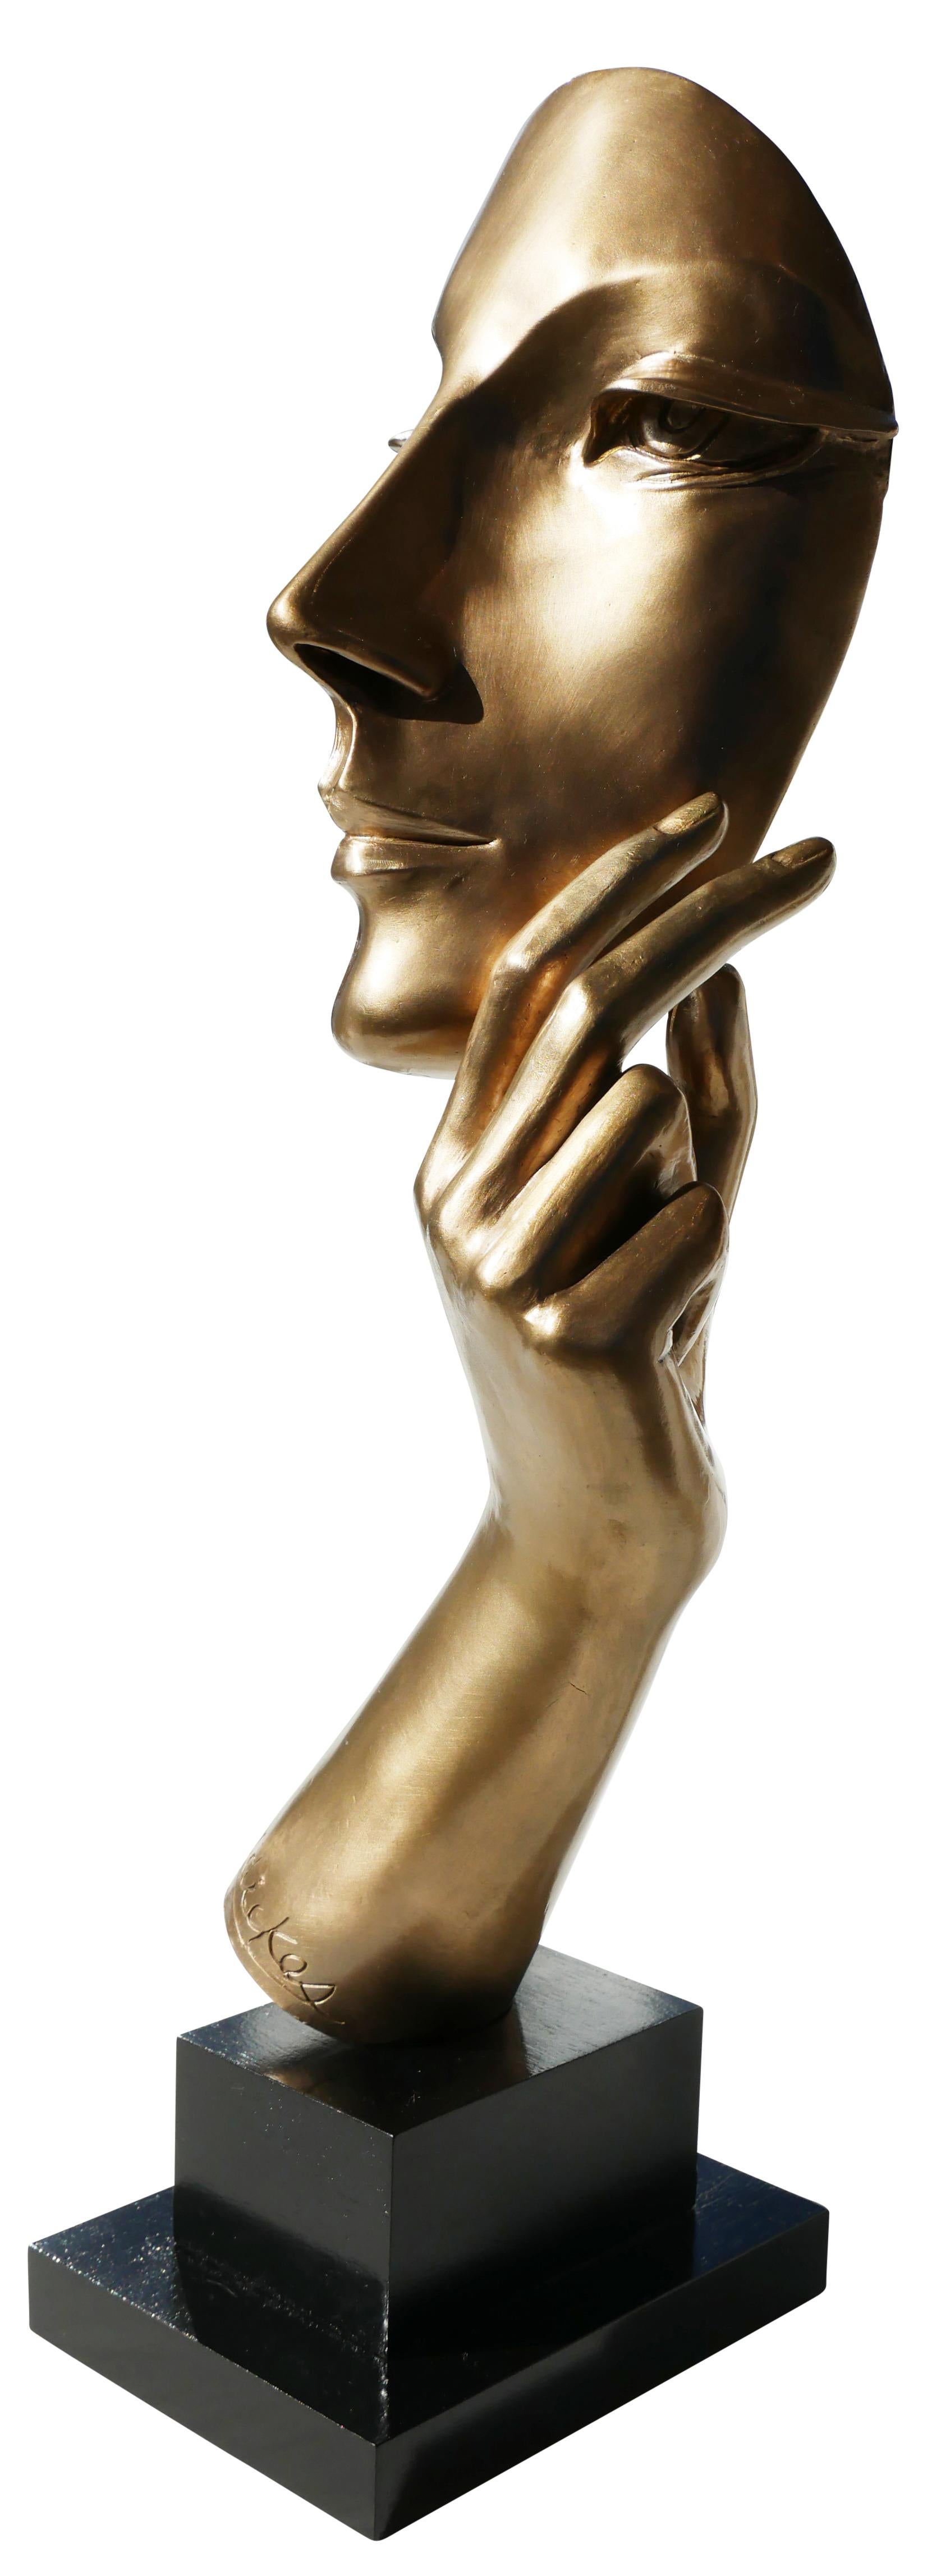 Abstract Modernist Female Face with Arm Bronze Sculpture - Brown Abstract Sculpture by David Adickes